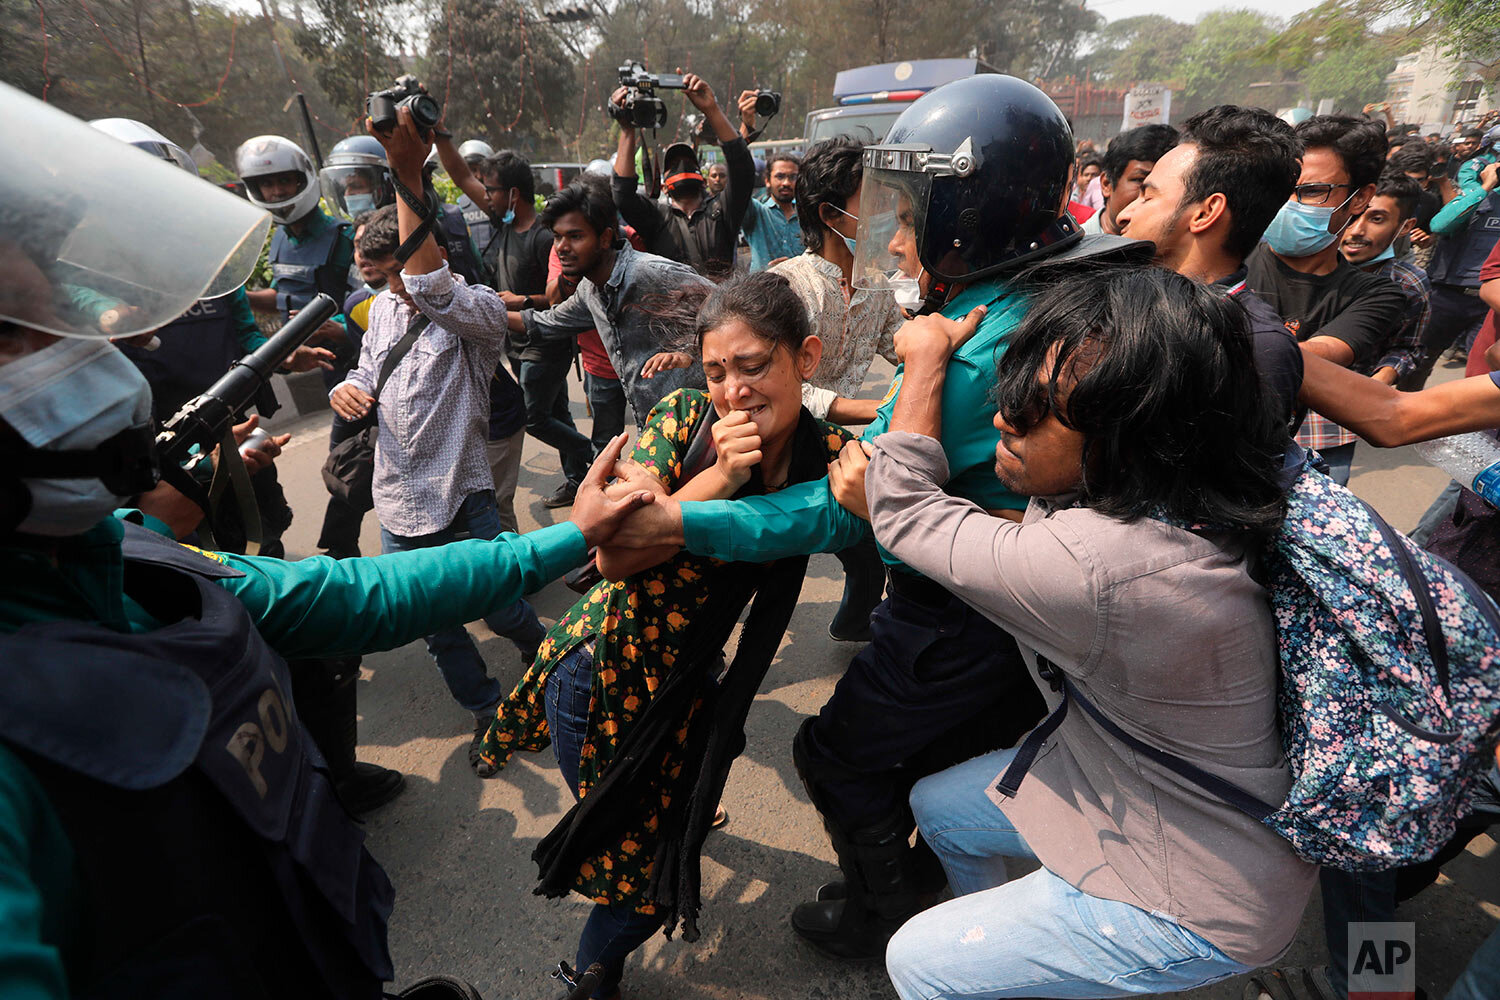  Bangladeshi students clash with police during a protest in Dhaka, Bangladesh, Monday, March 1, 2021. (AP Photo/Mahmud Hossain Opu) 